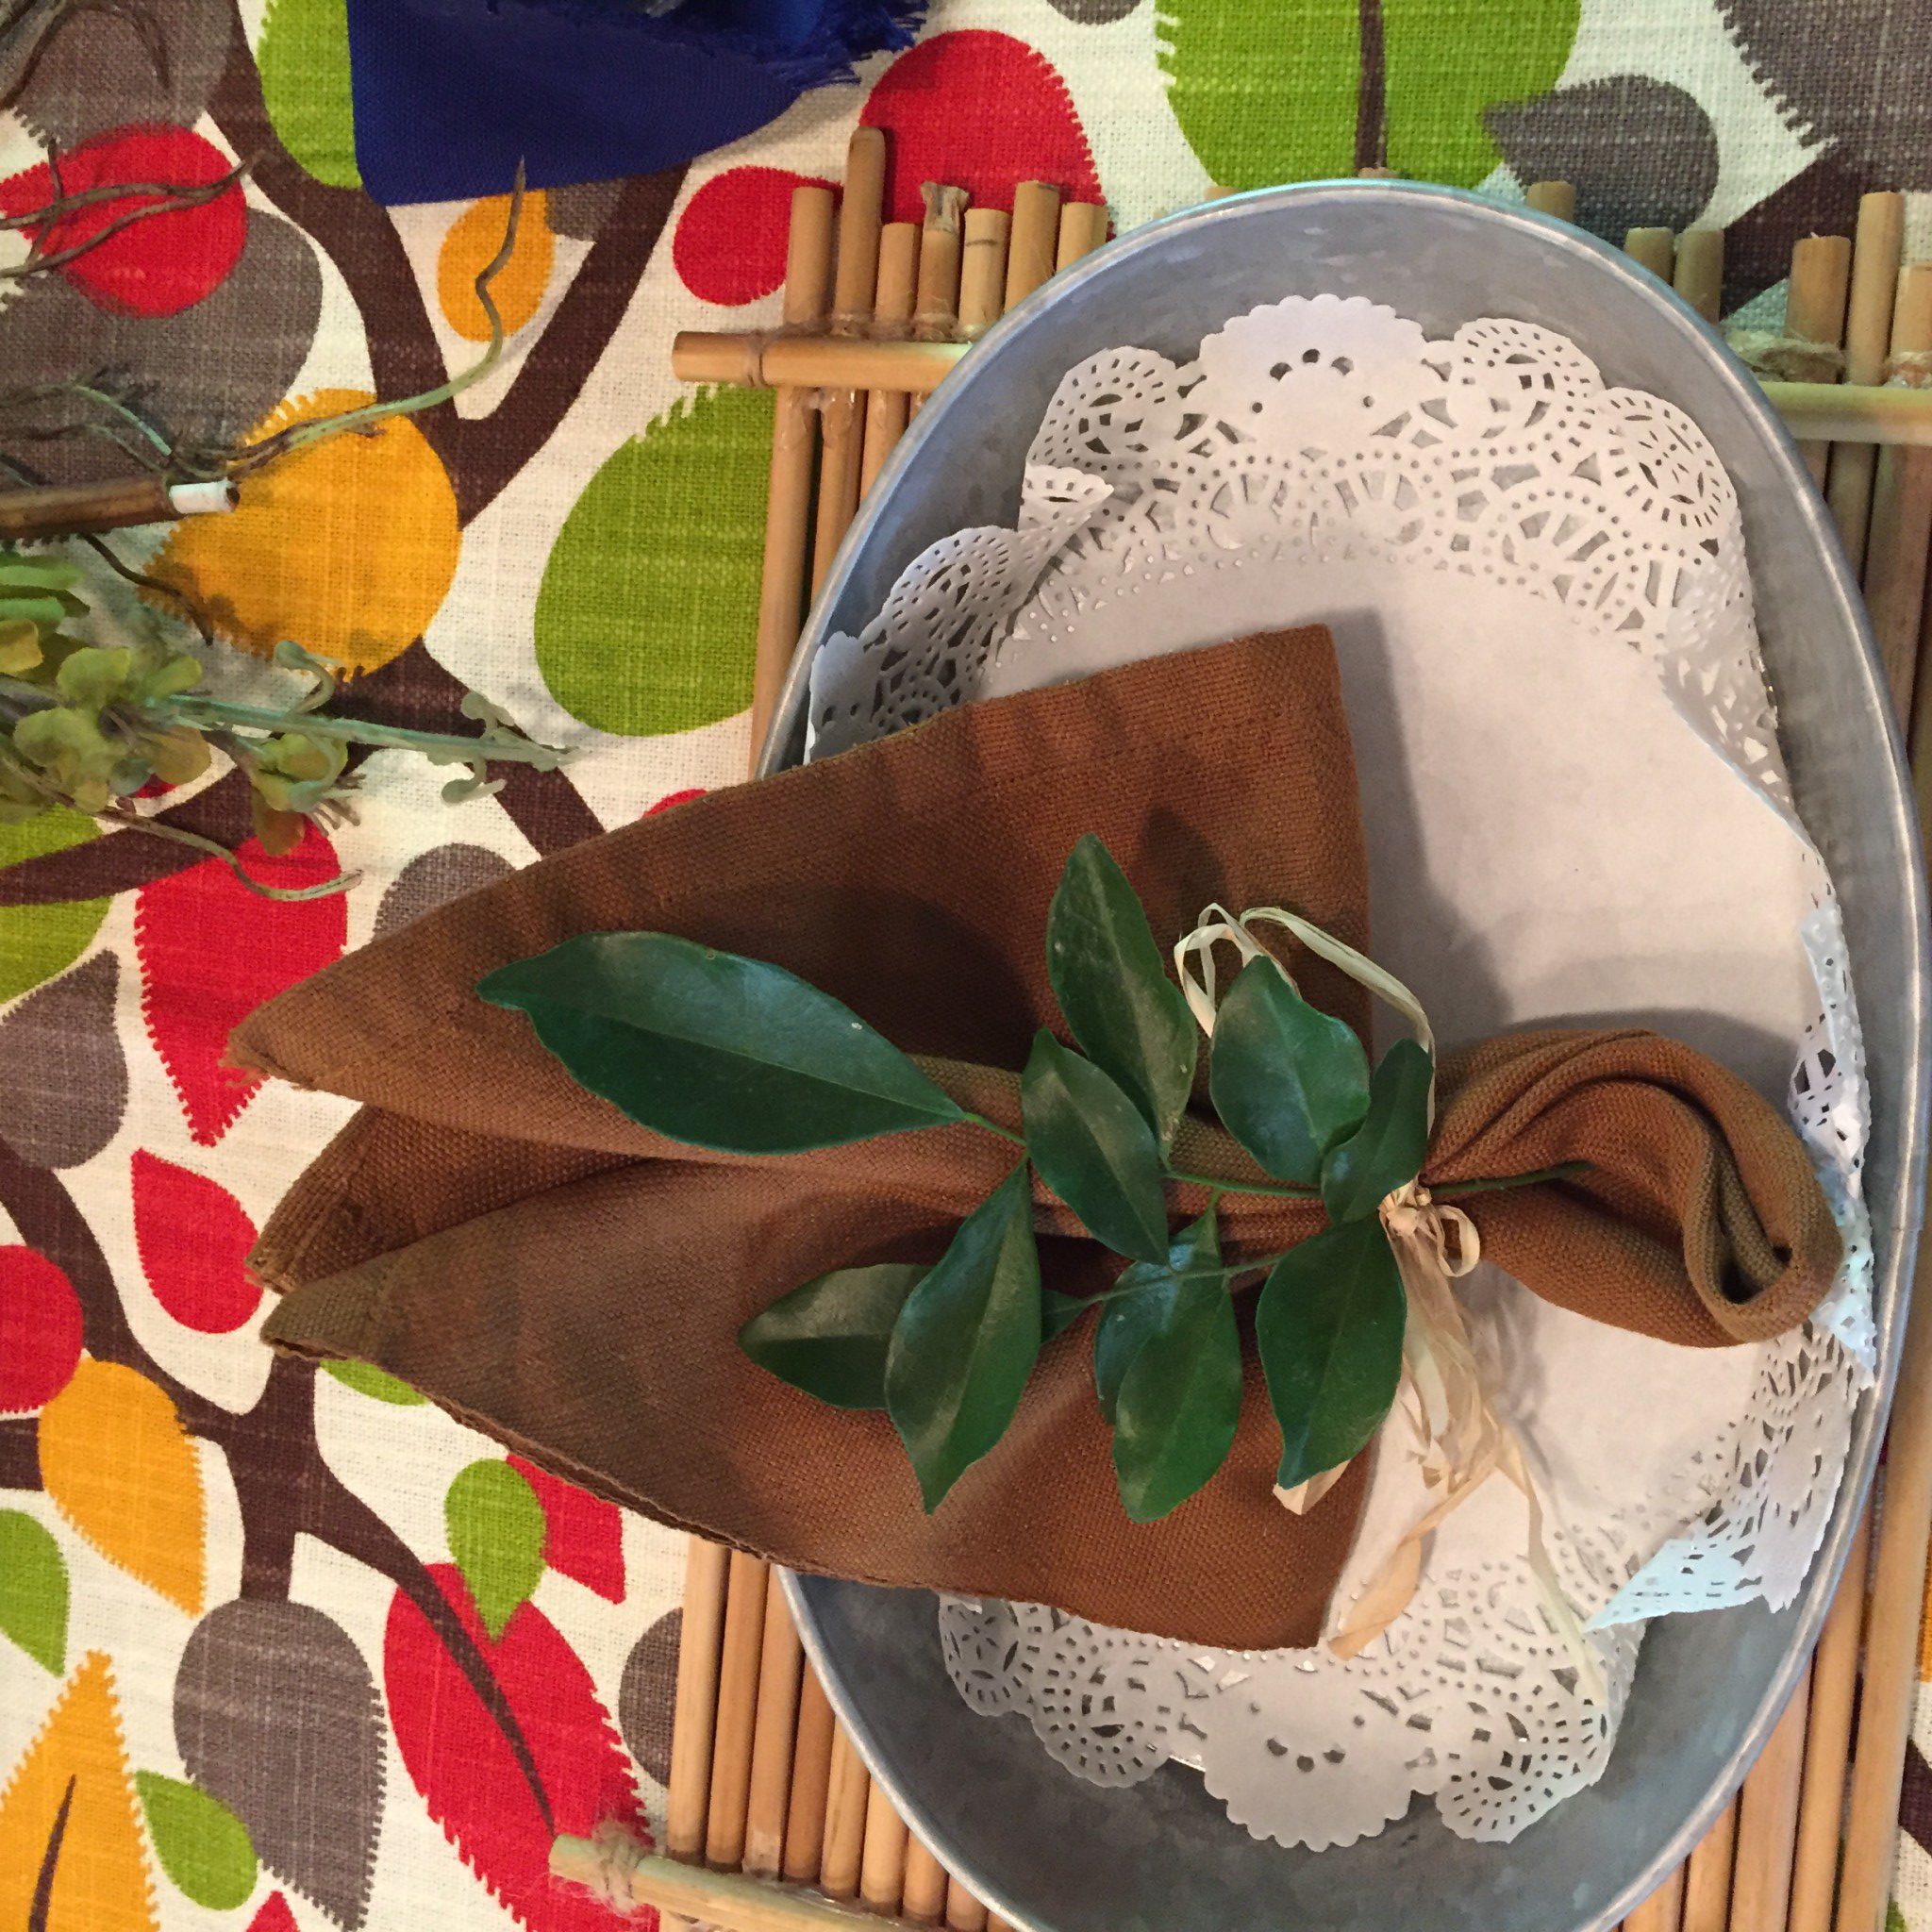 Rosal leaves as napkin rings.  Tin plates glammed up with white doilies. 